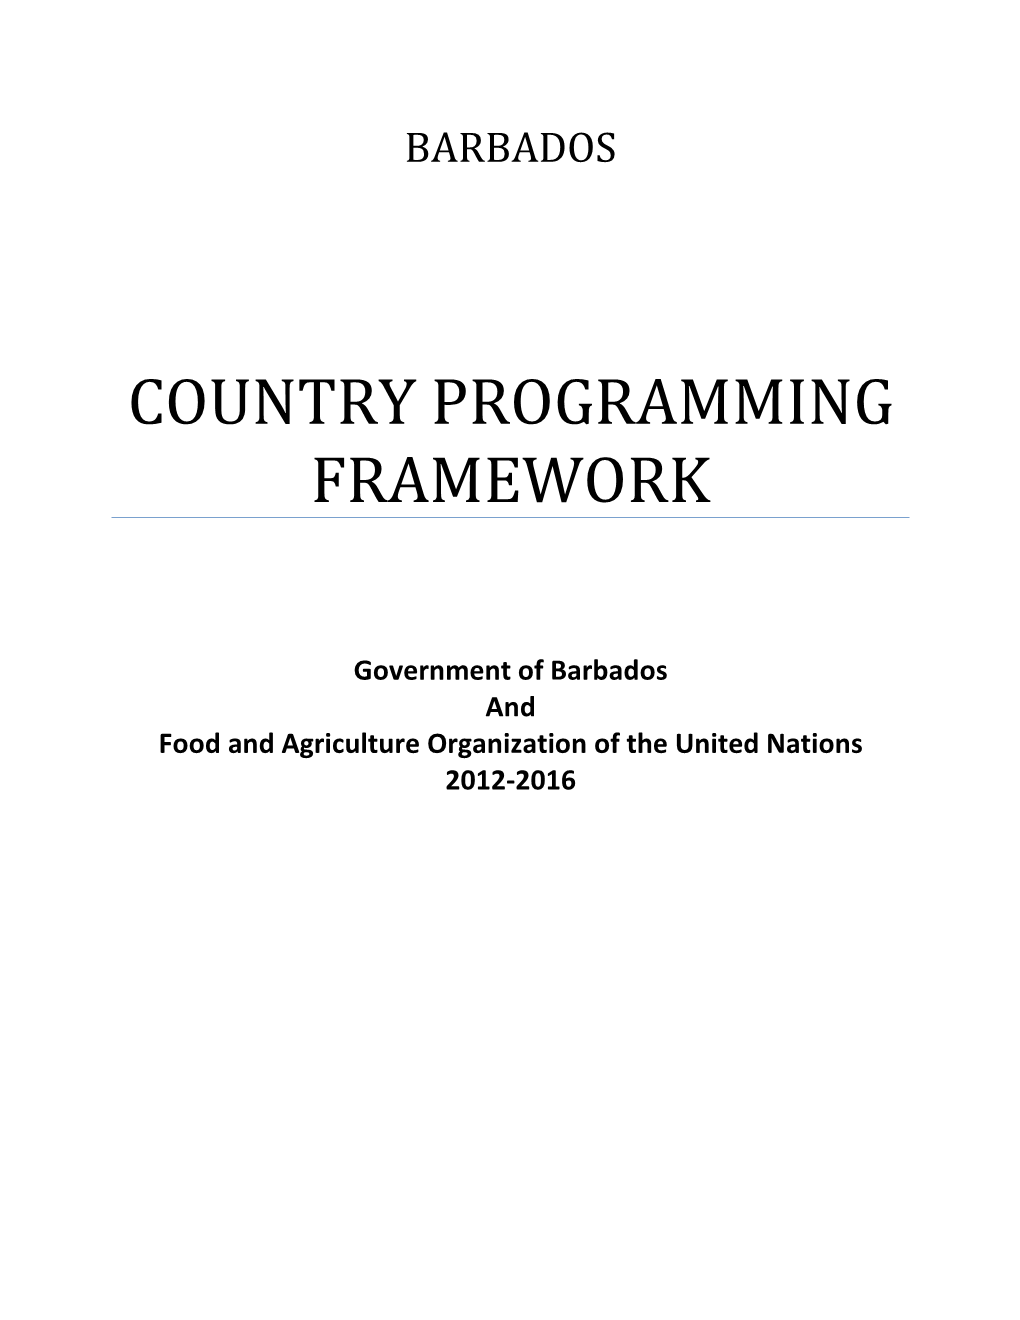 Country Programming Framework (CPF). Government of Barbados